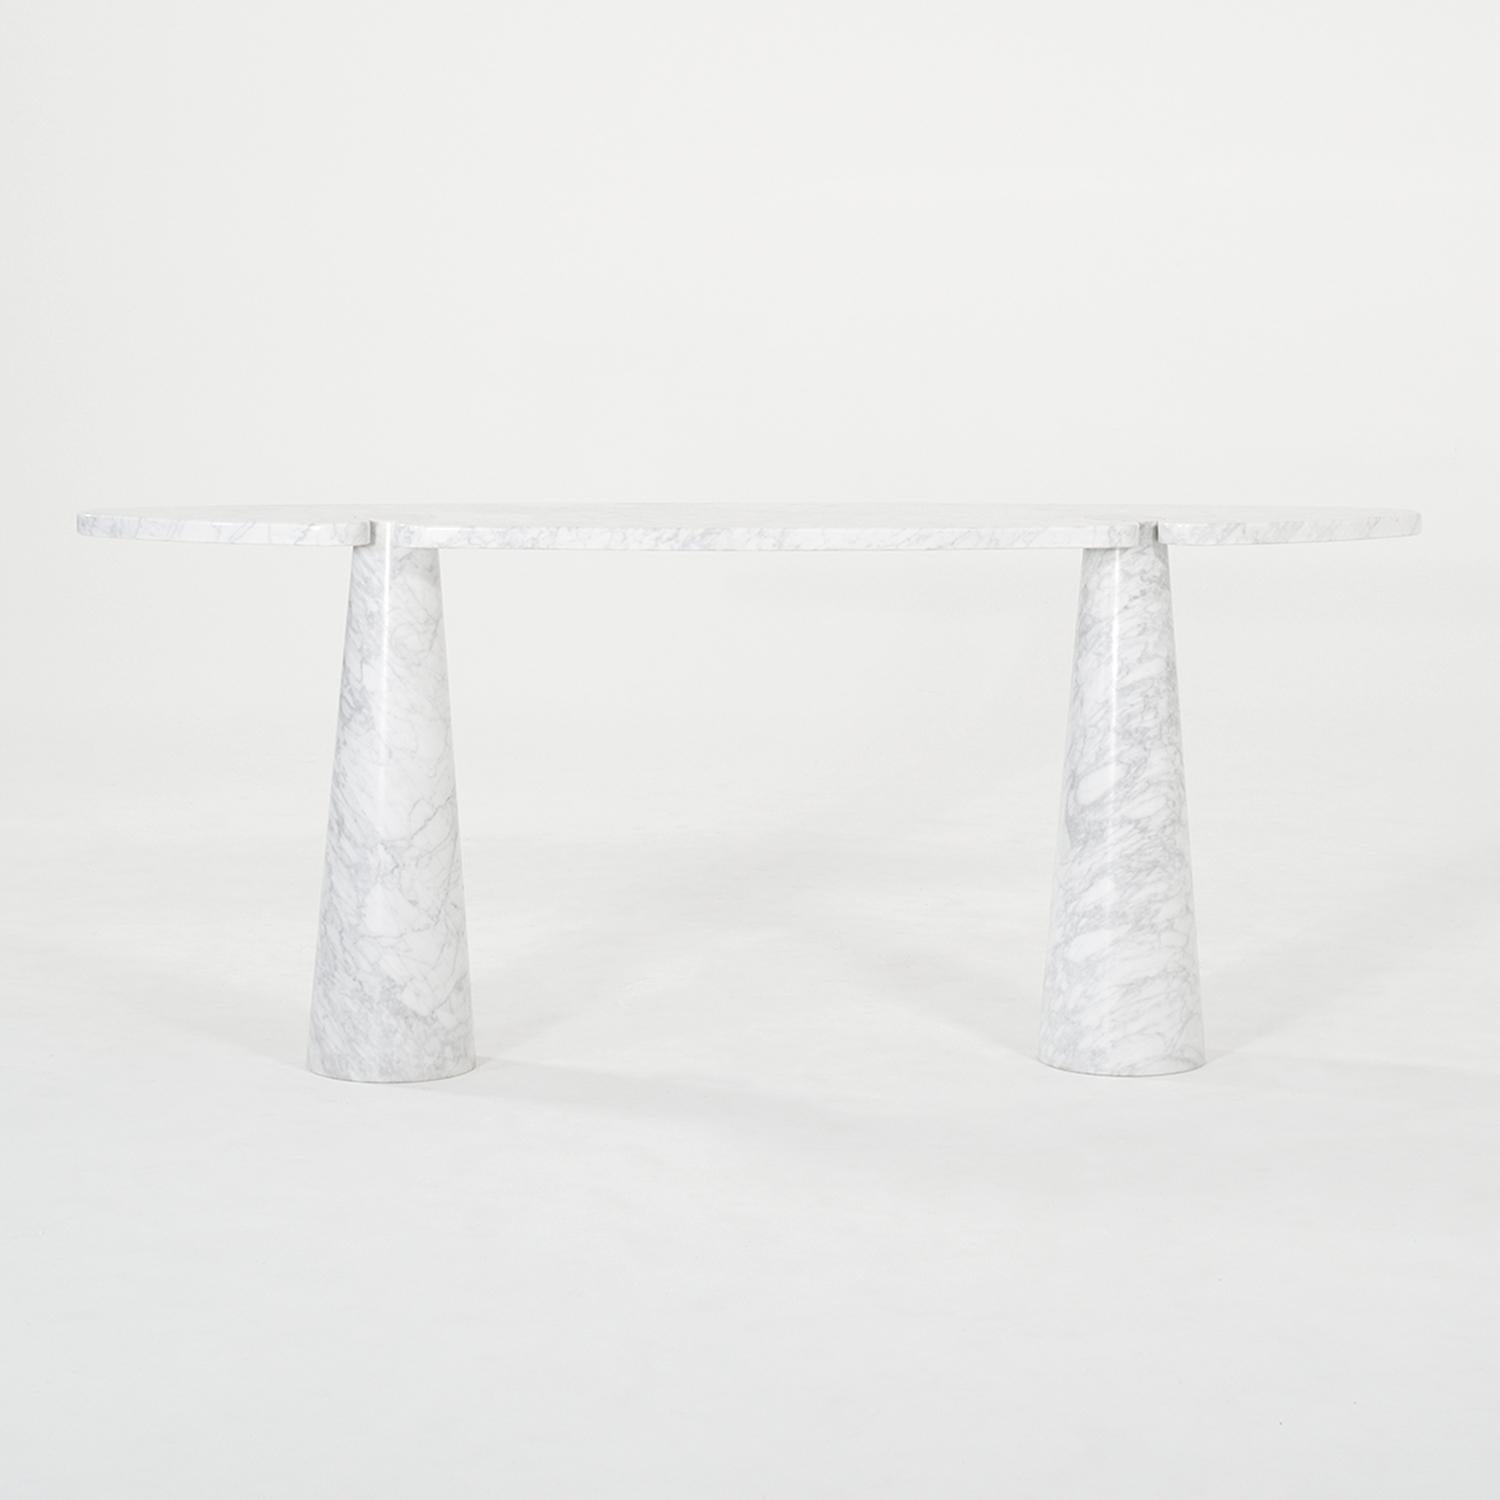 A vintage Mid-Century modern Italian freestanding console table made of hand crafted Carrara marble, designed by Angelo Mangiarotti and produced by Skipper in good condition. The half rounded, tall Eros end table has no joints, only an interlocking